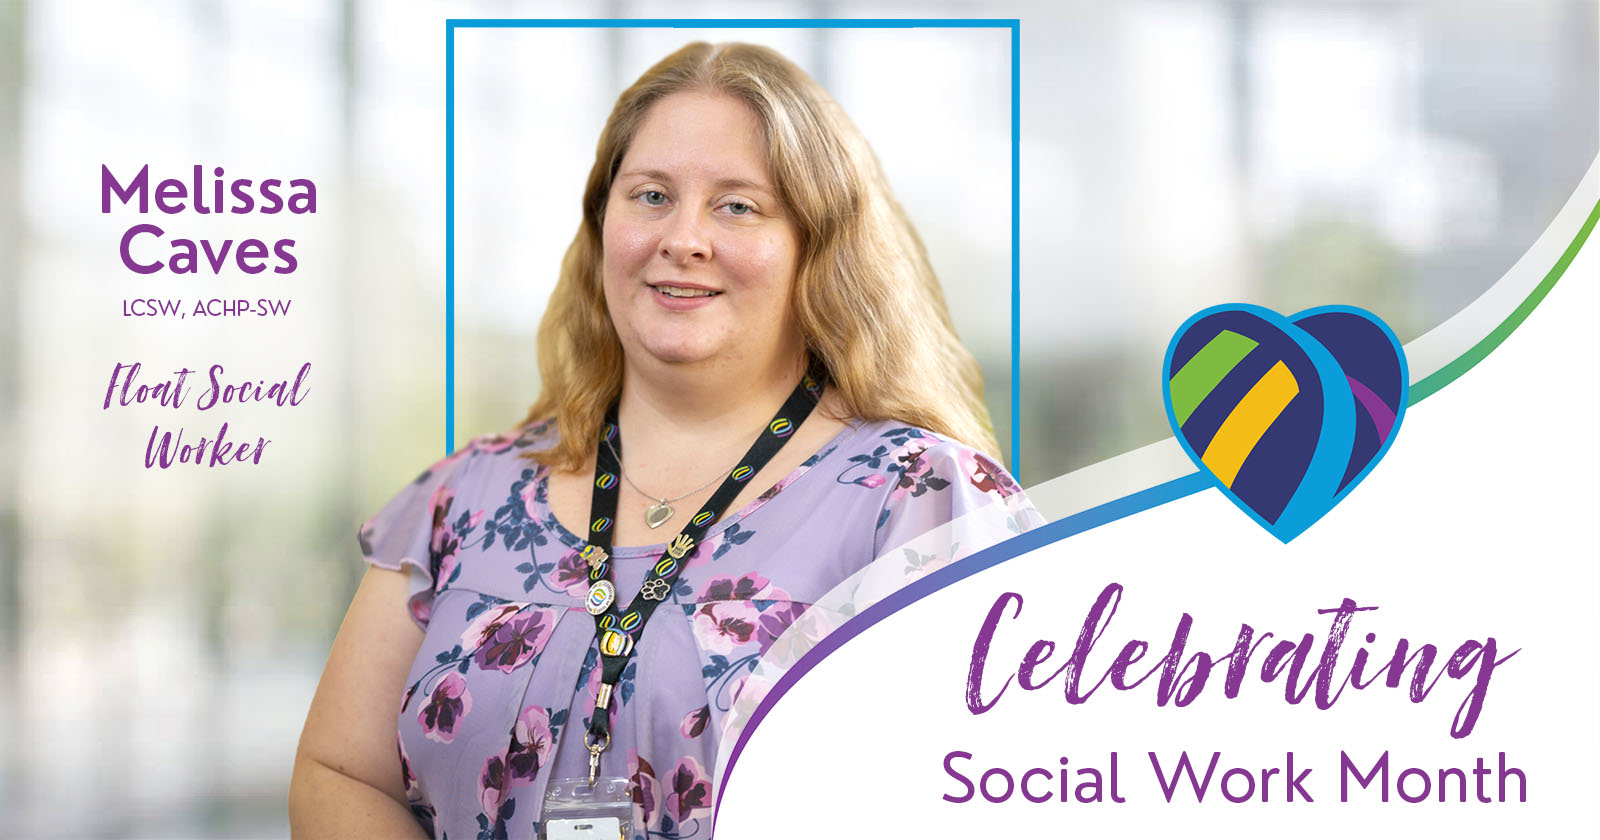 Melissa Caves LCSW, ACHP-SW Social Work Month